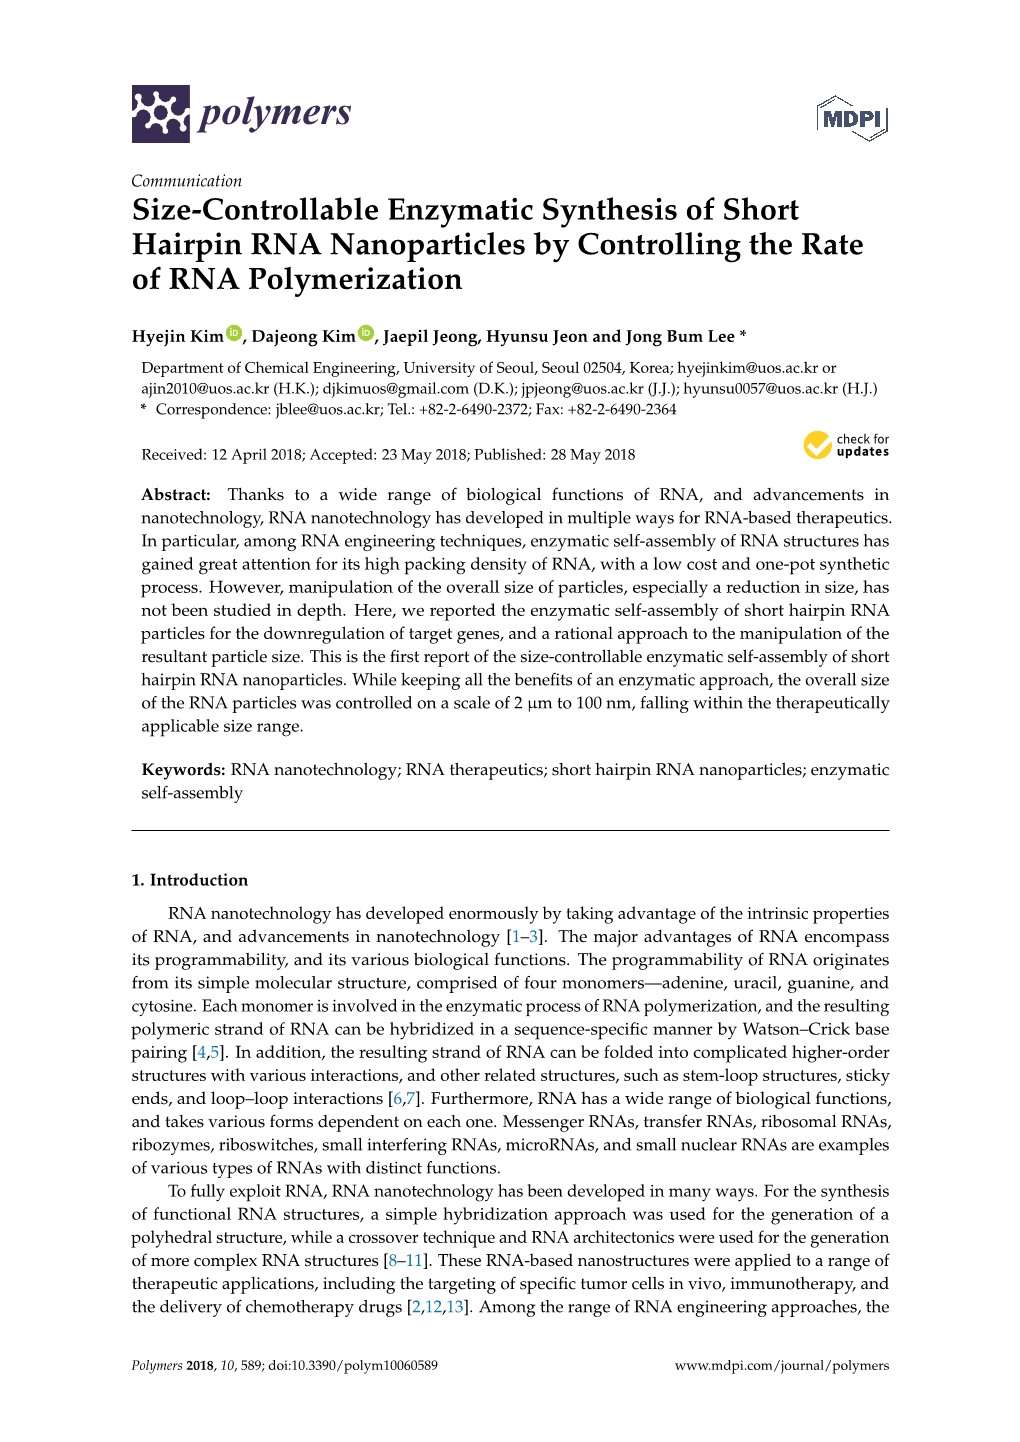 Size-Controllable Enzymatic Synthesis of Short Hairpin RNA Nanoparticles by Controlling the Rate of RNA Polymerization